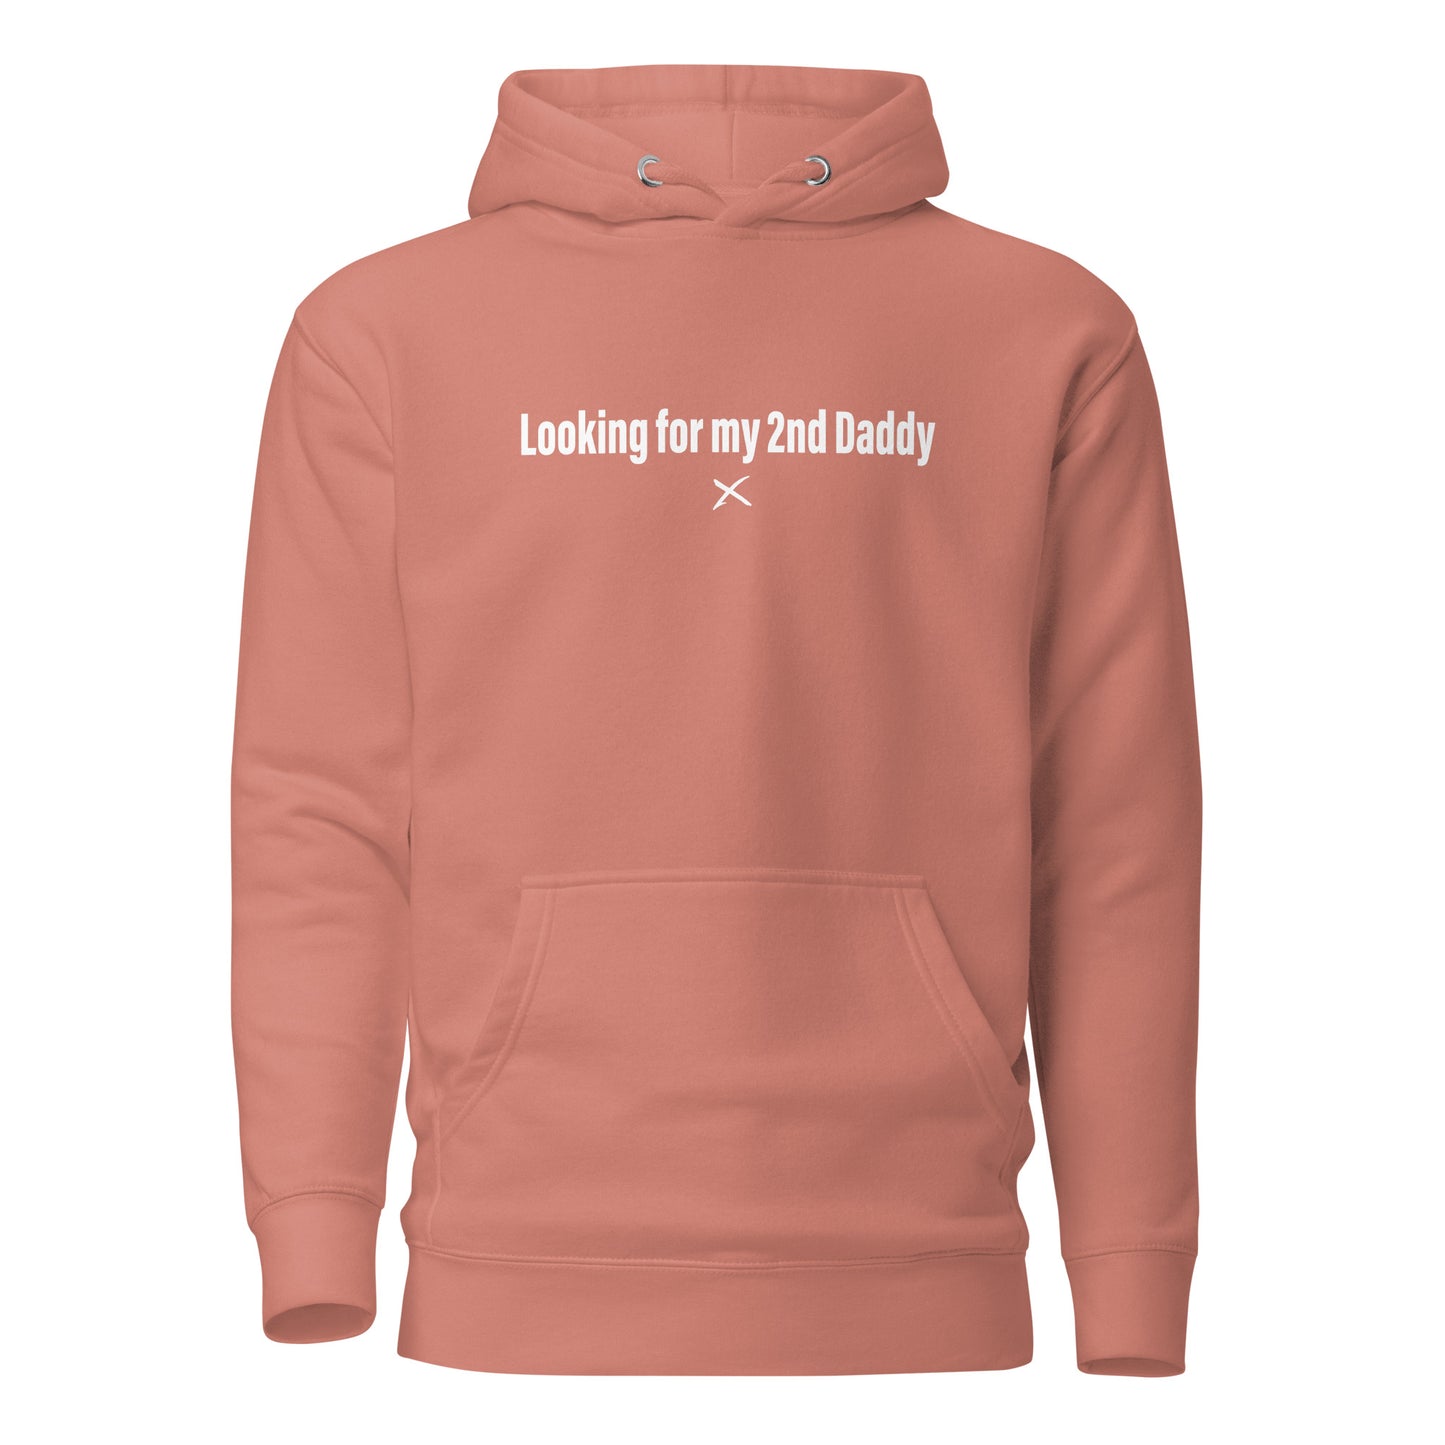 Looking for my 2nd Daddy - Hoodie